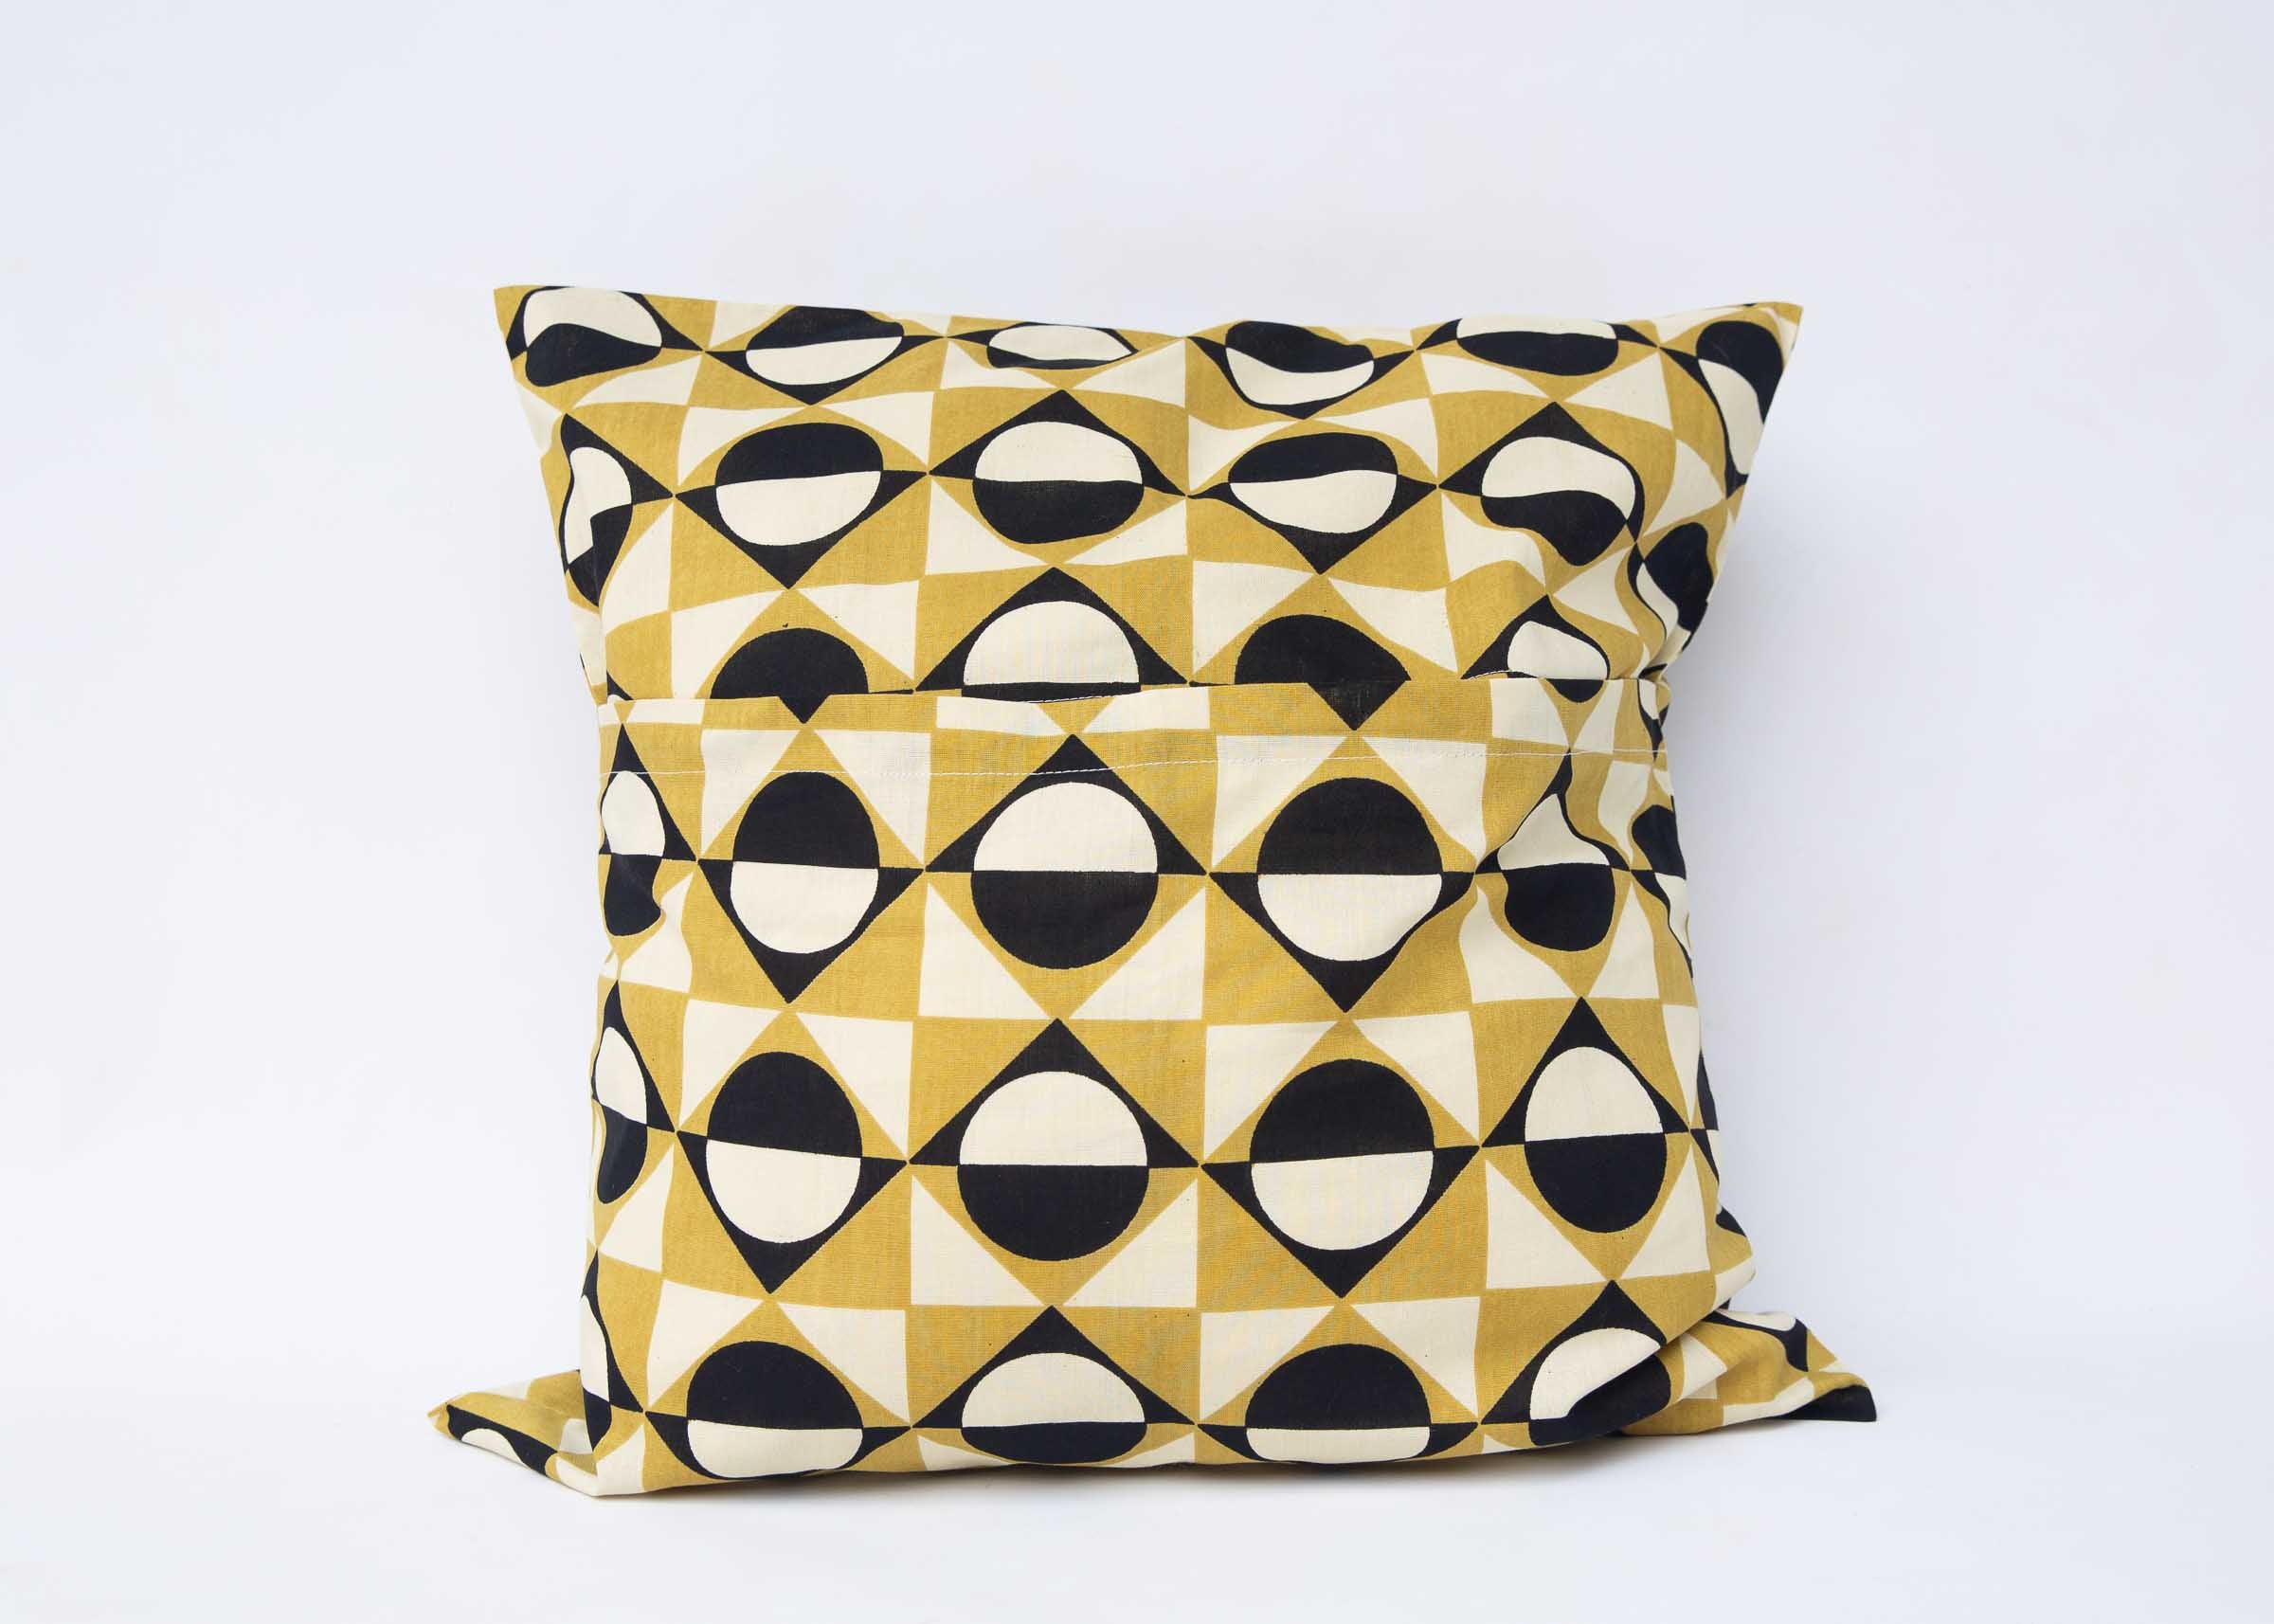 Display of 20x20 black, white and mustard pillow case